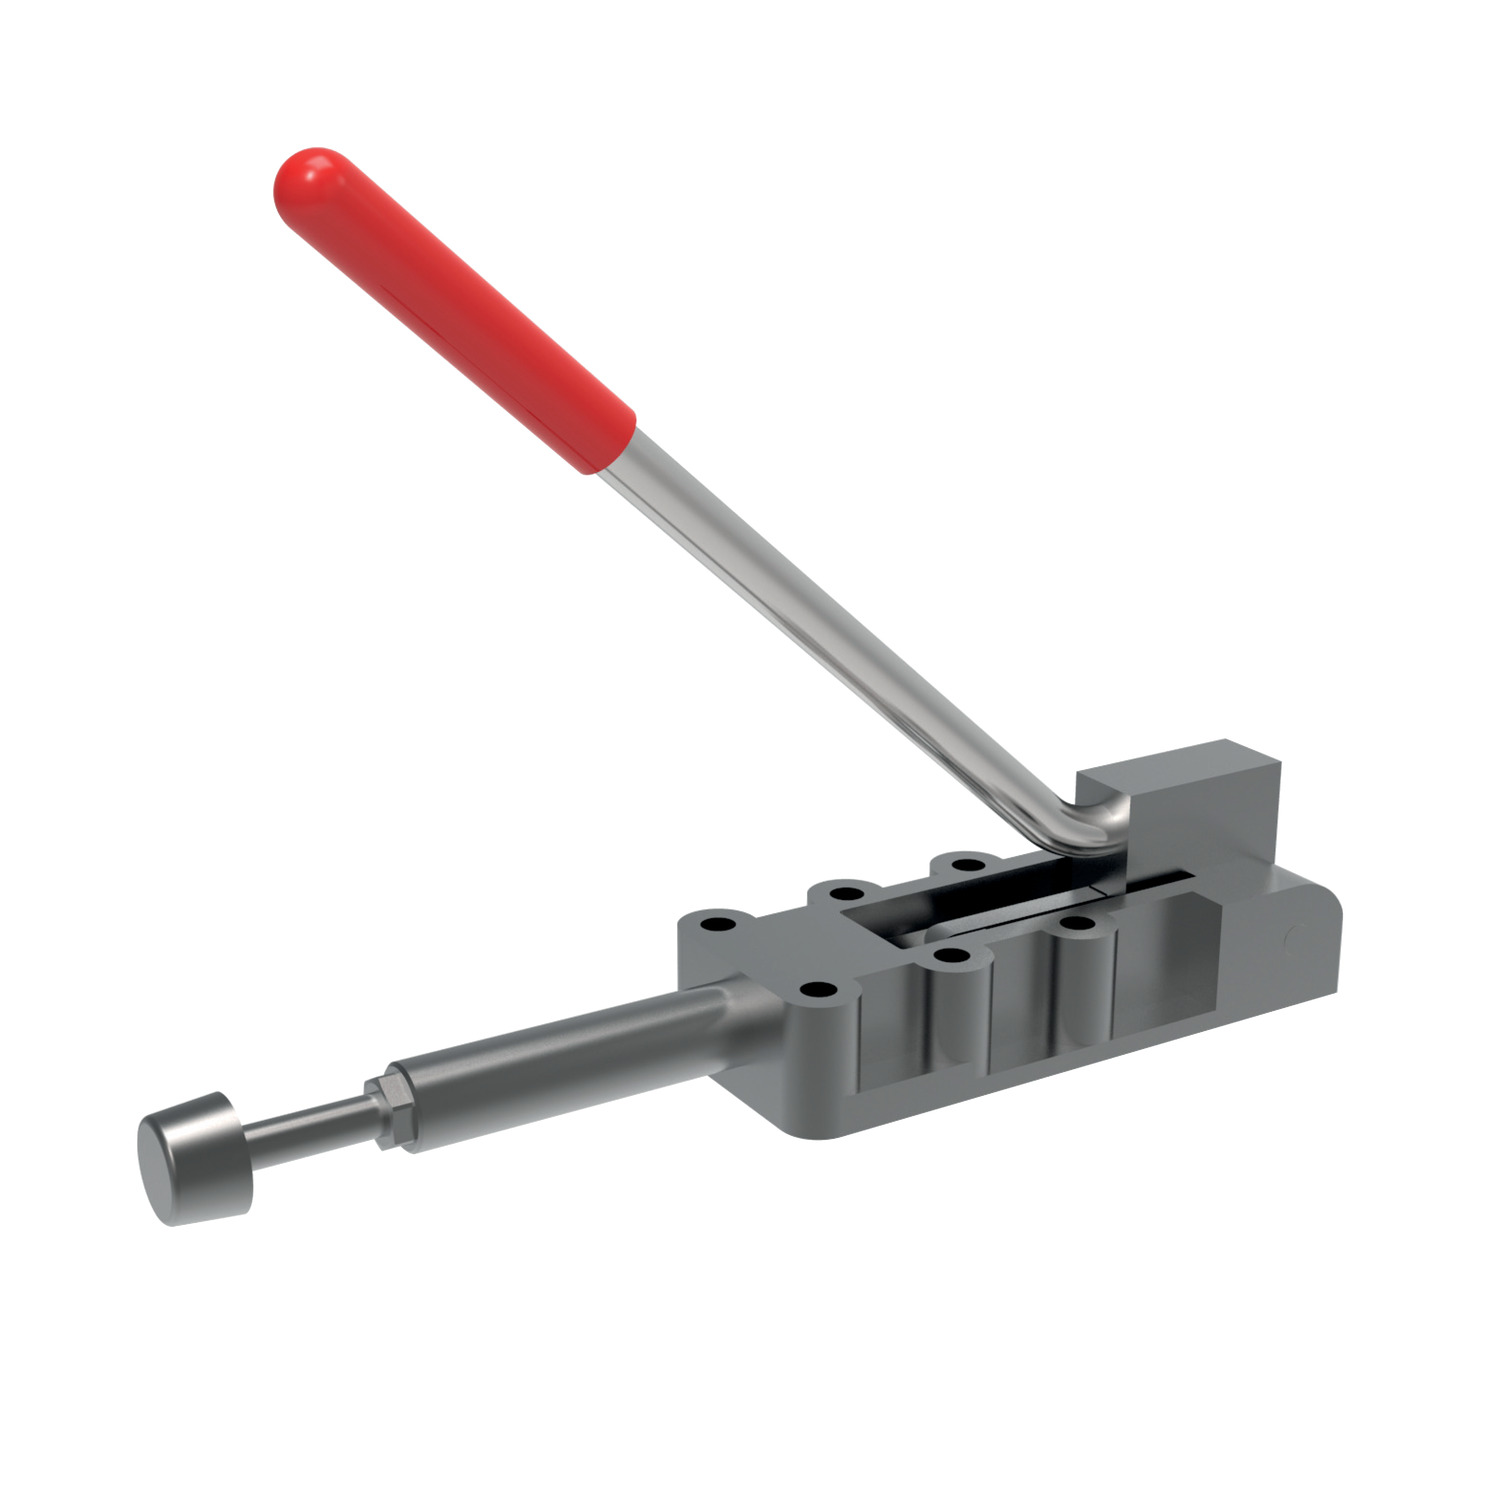 42100 - Heavy Duty Push-Pull Toggle Clamps